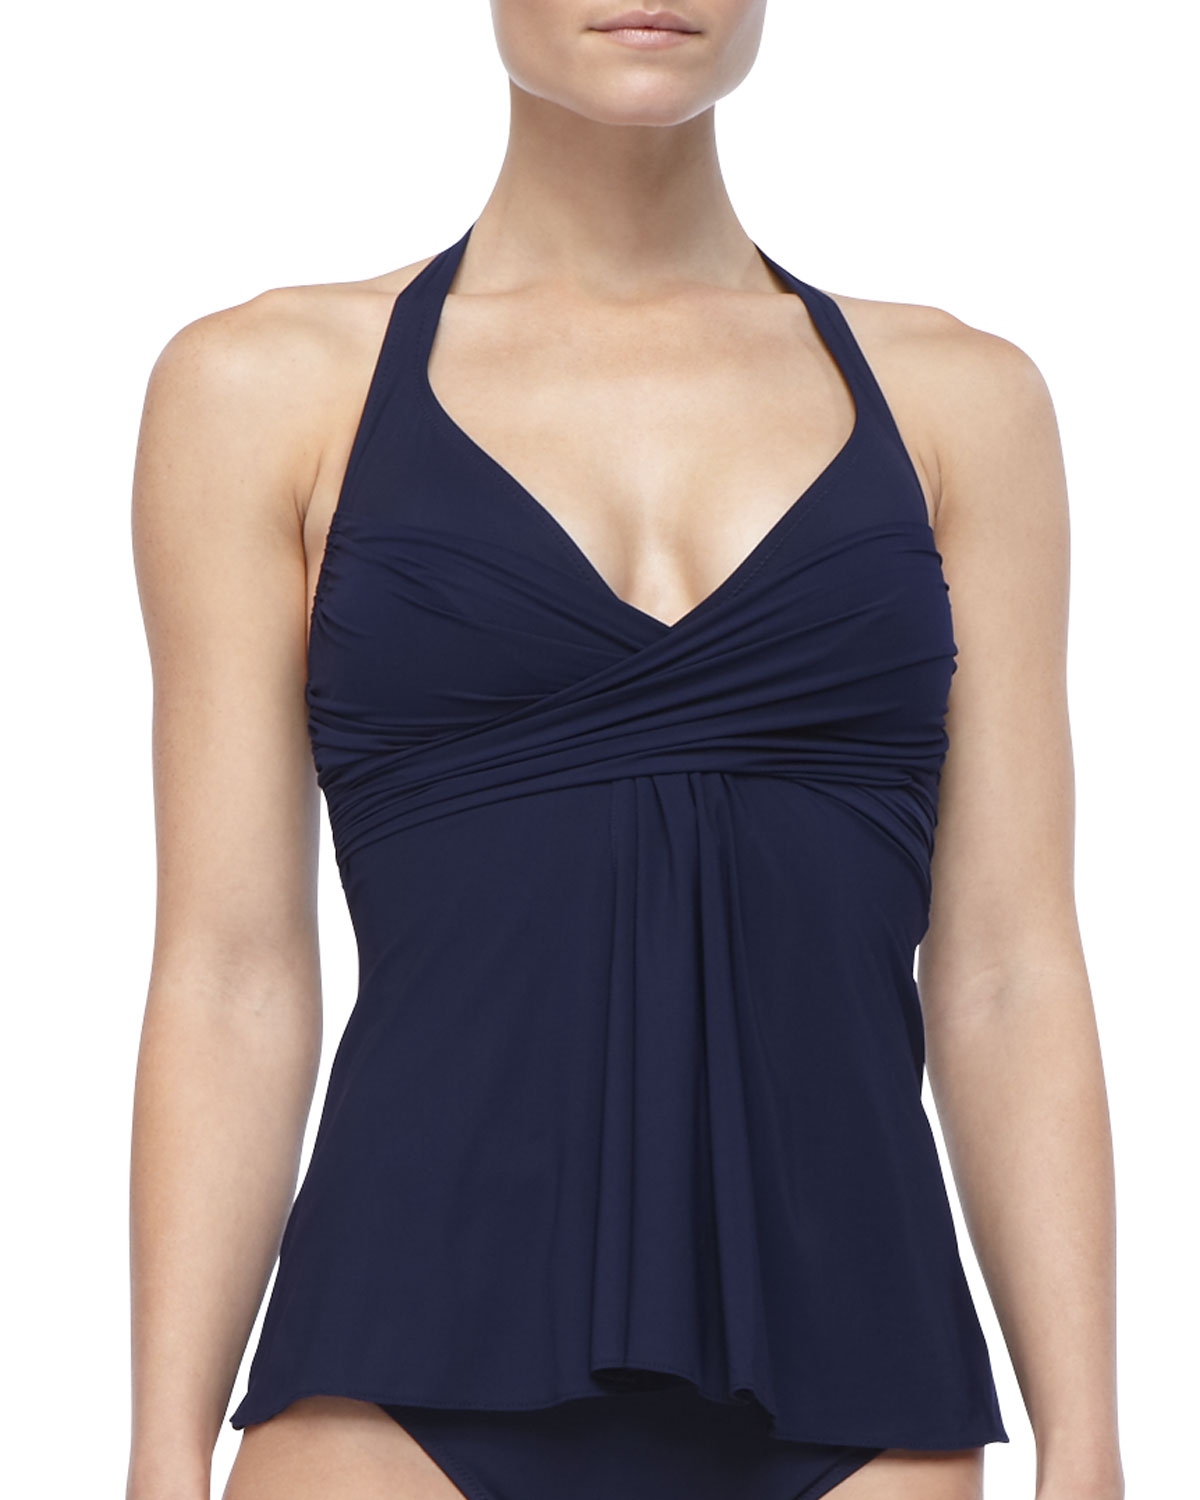 Lyst - Gottex Solid-color Tankini Top Dark Navy 36 in Blue